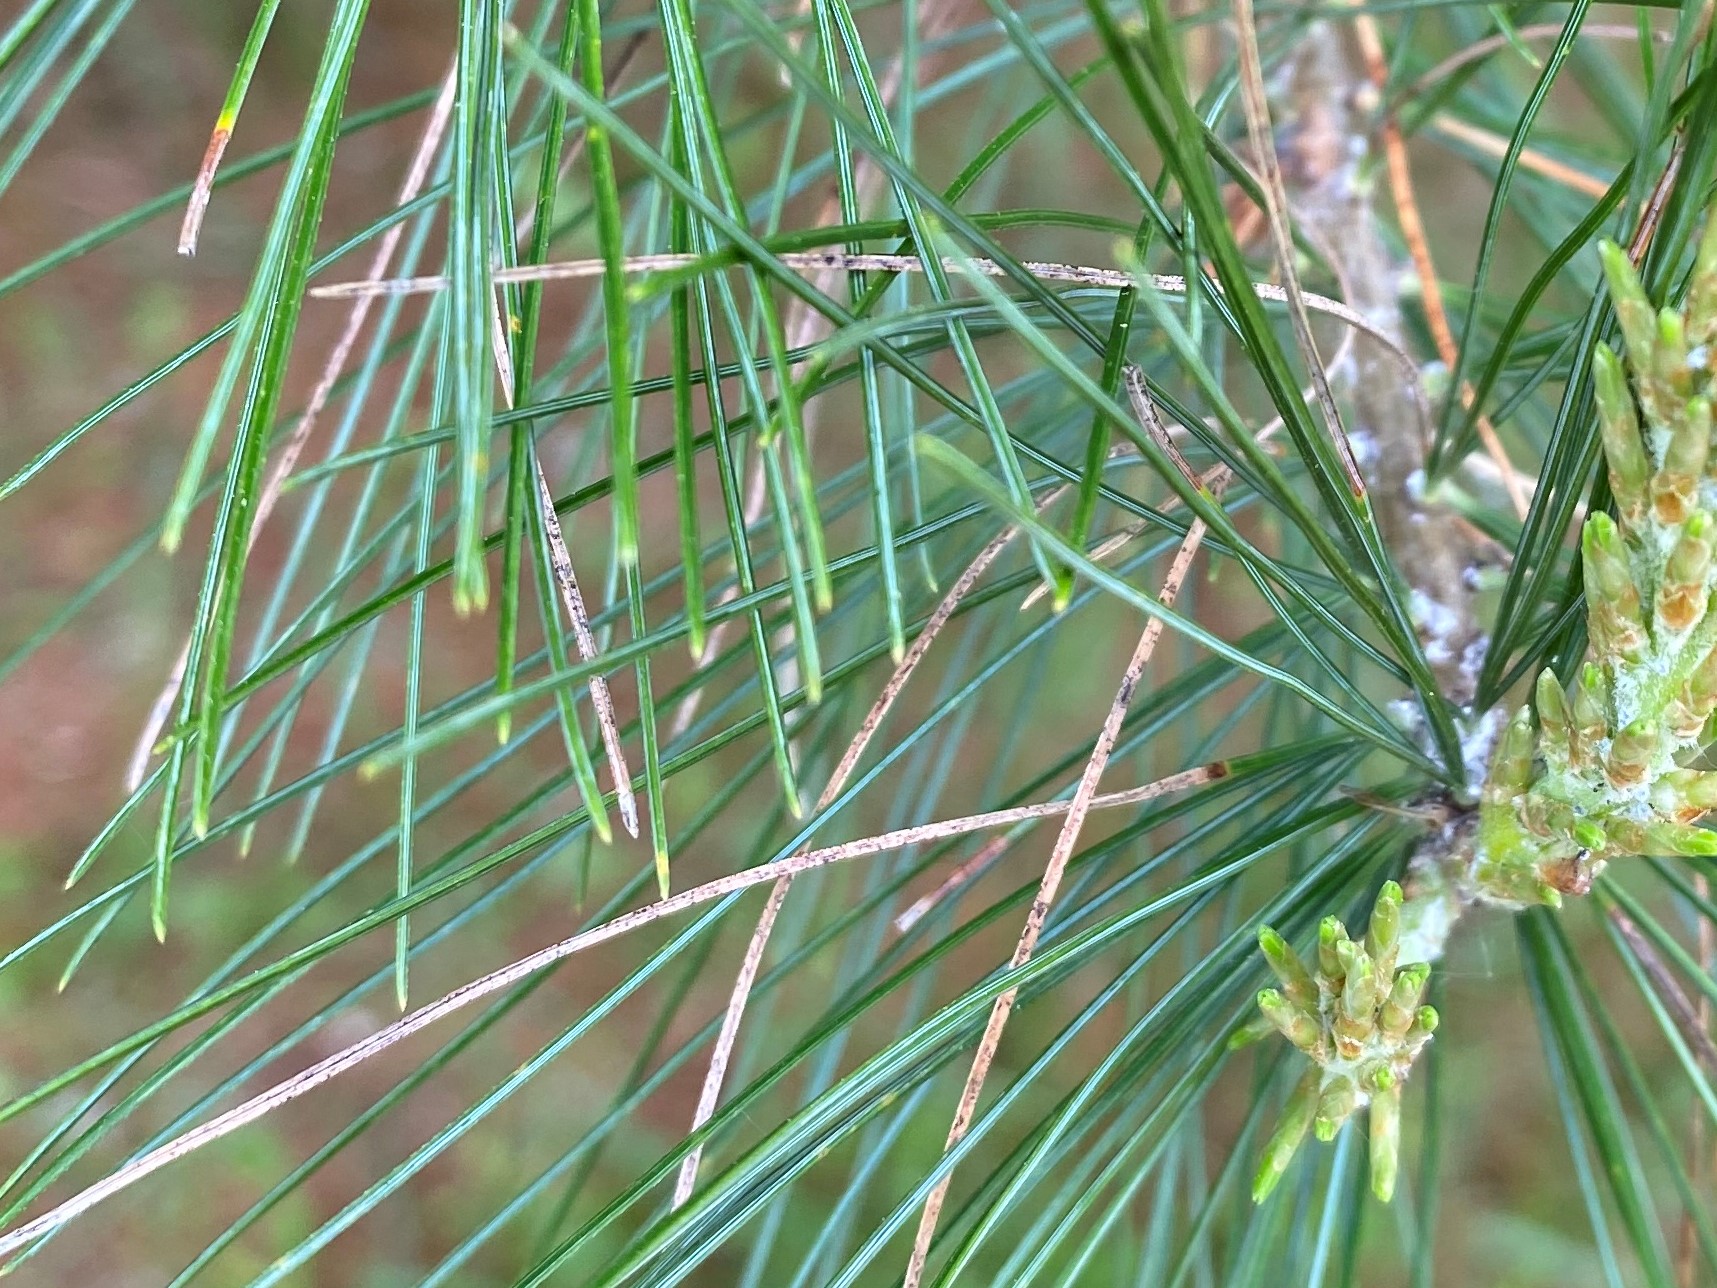 Some white pine needles are tan colored due to Lophodermium infection.